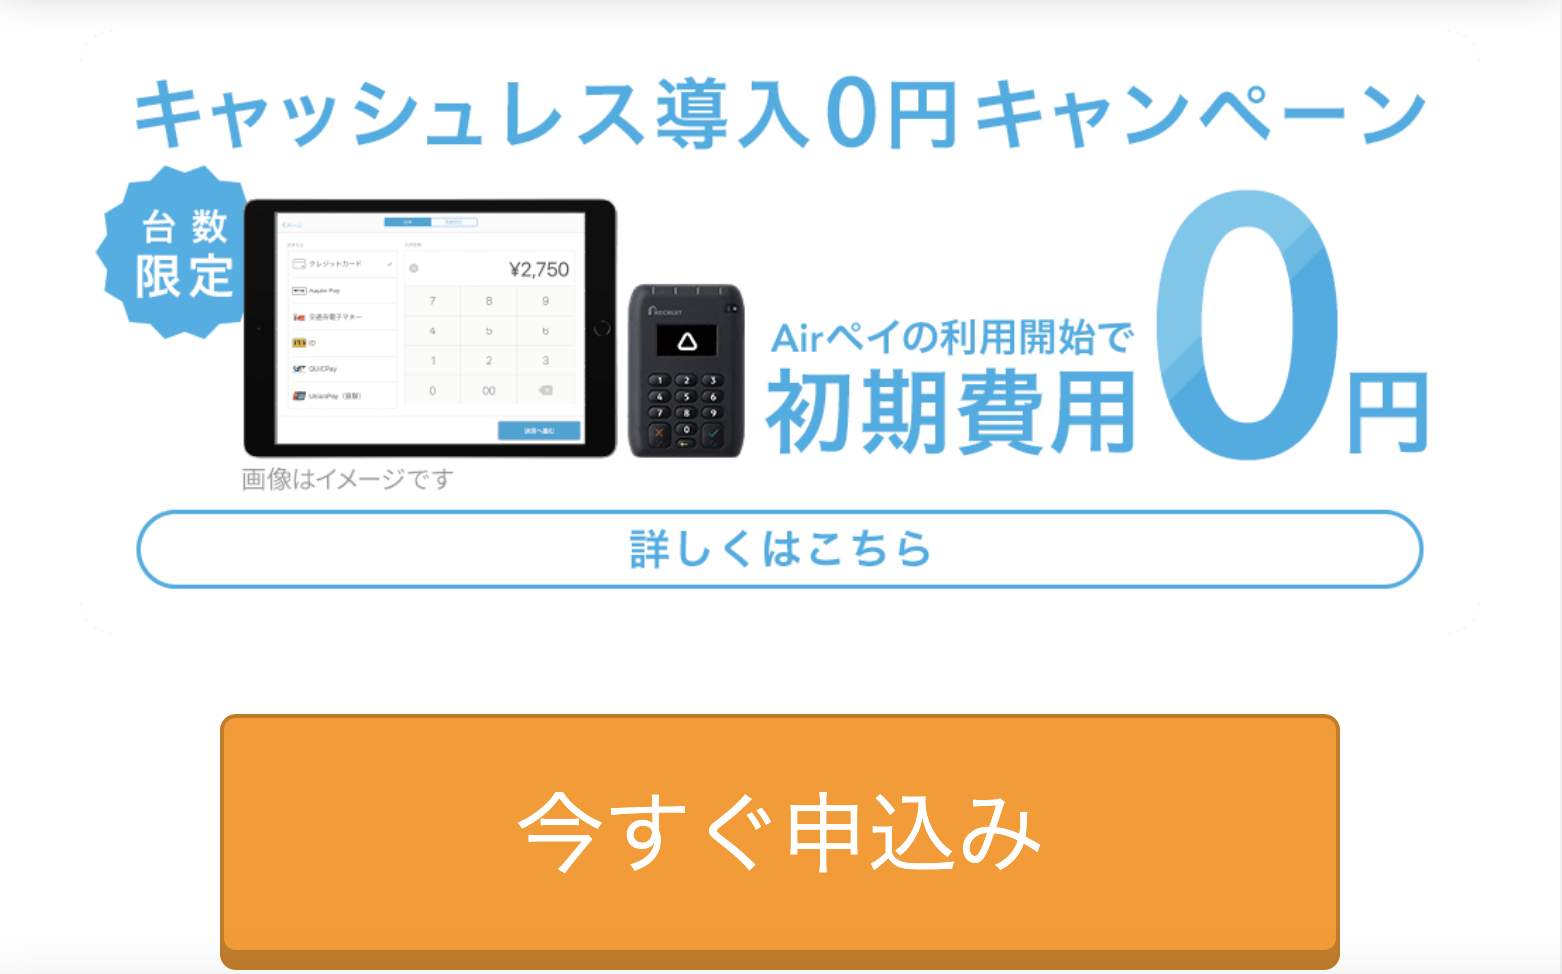 AirPAY今すぐ